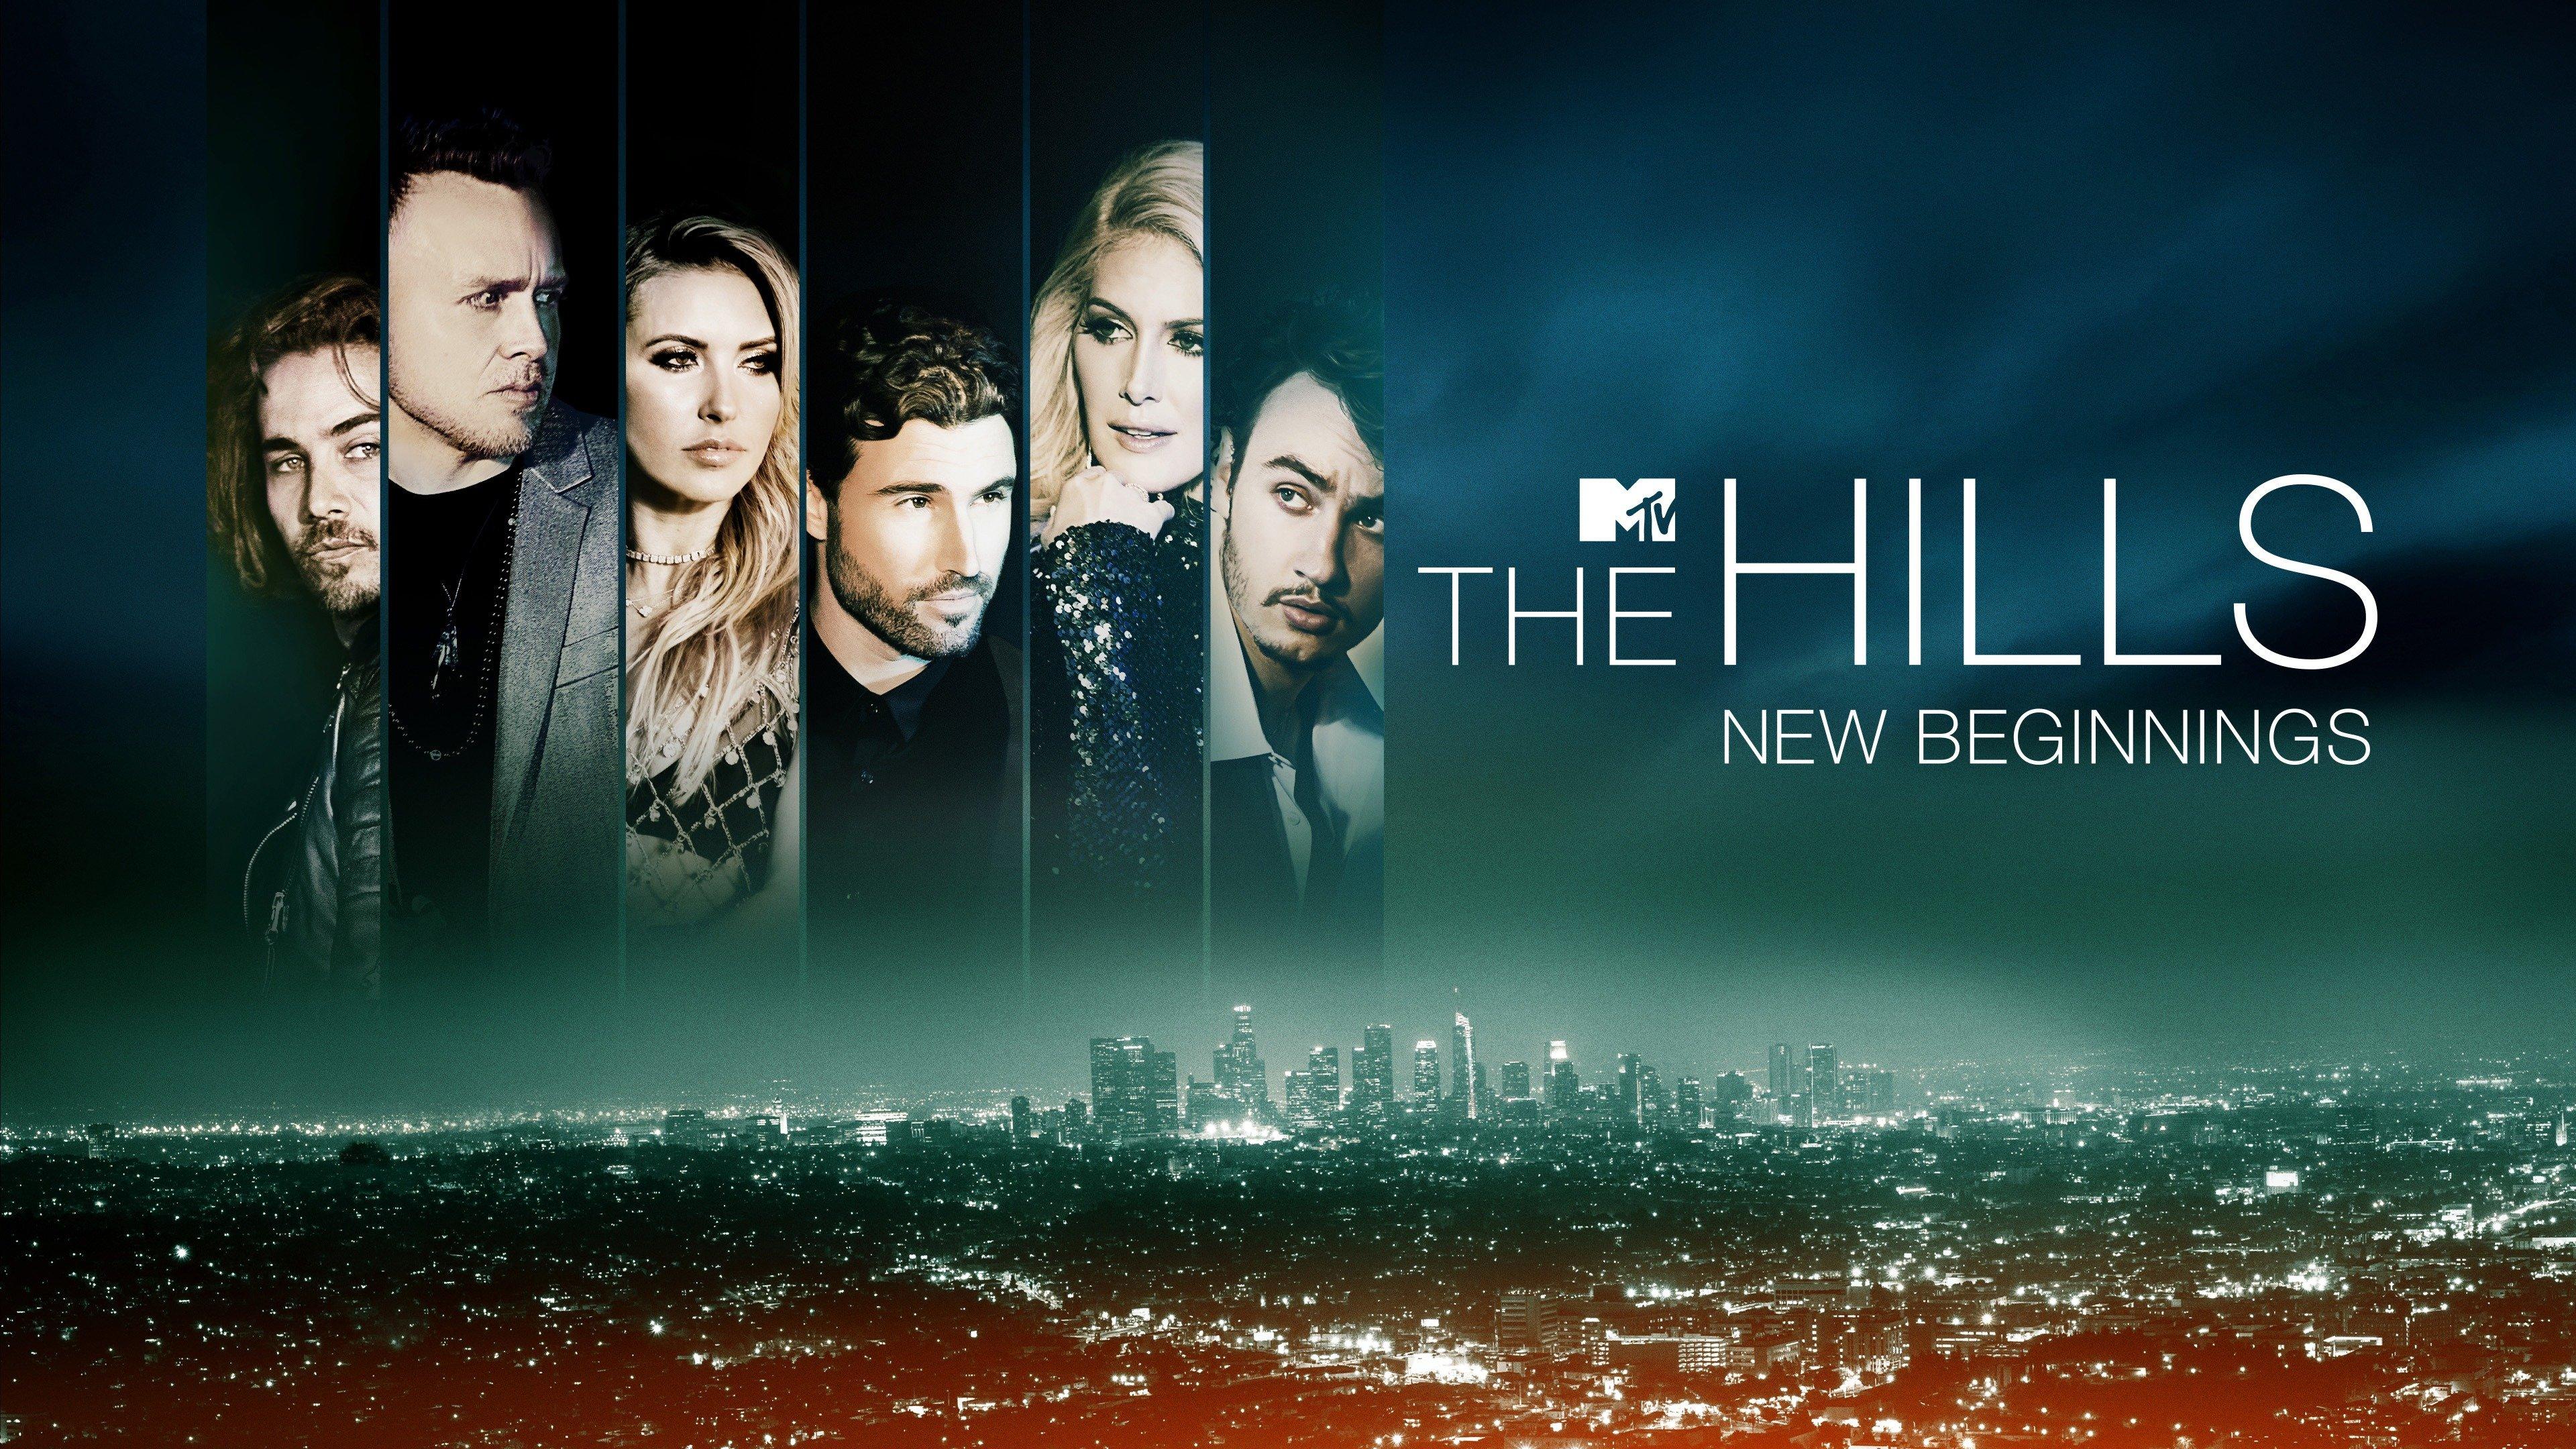 Watch The Hills New Beginnings Episodes Streaming on Philo